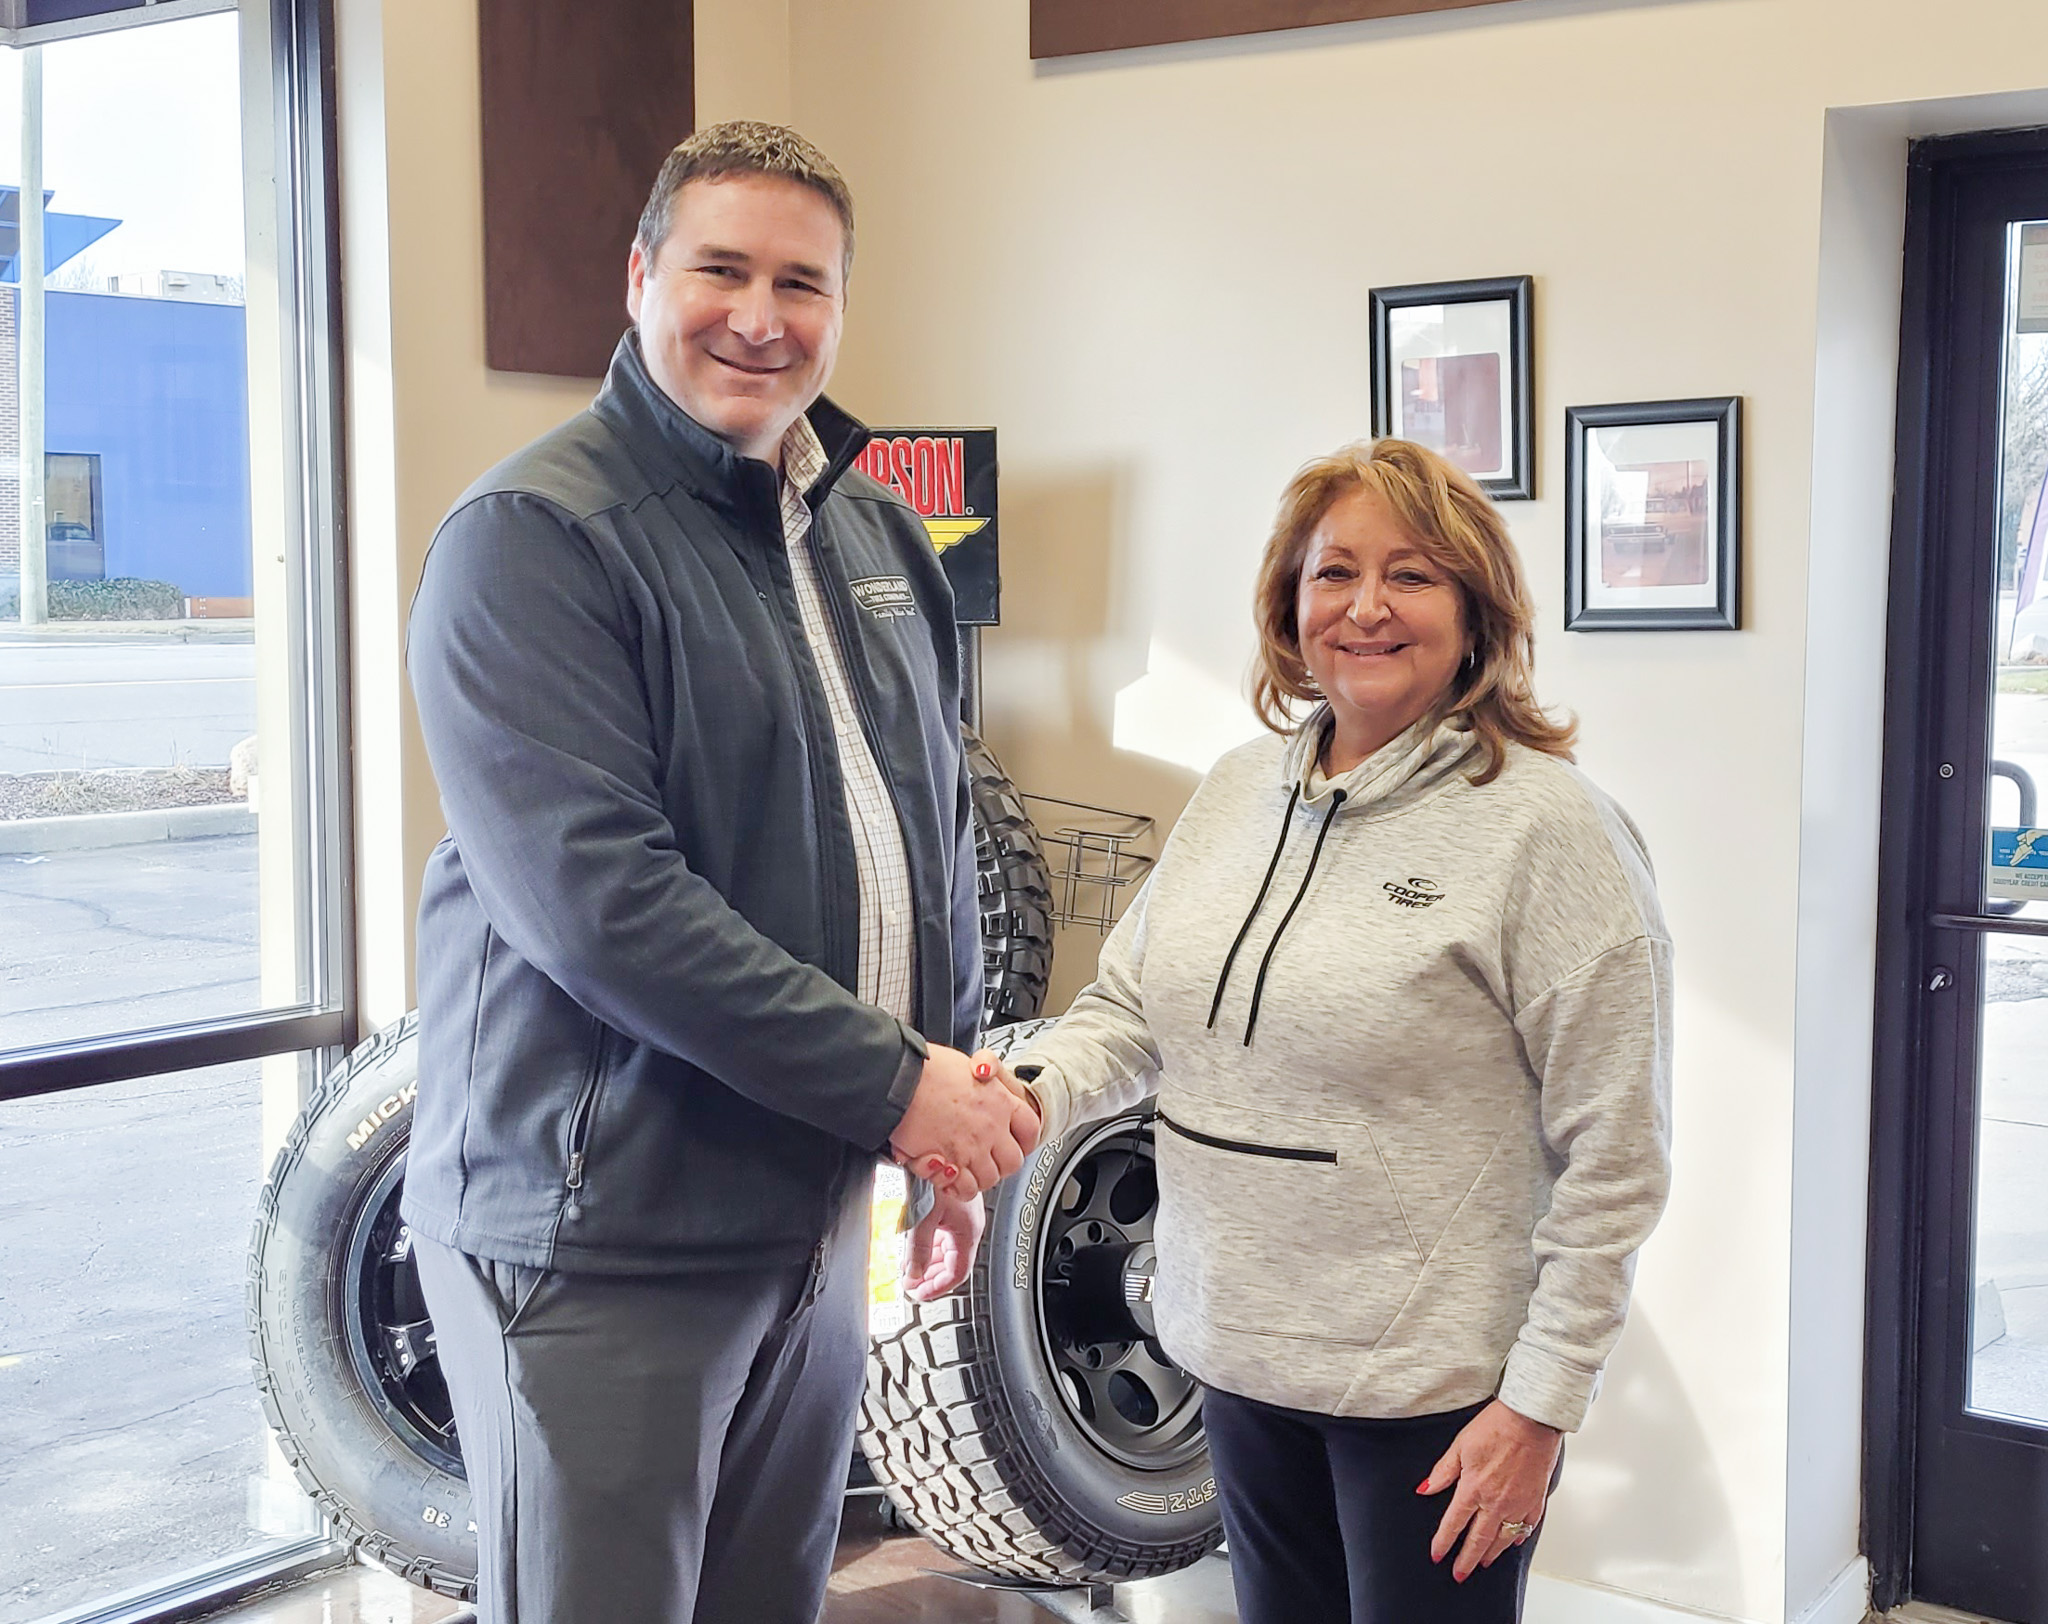 Dave Langerak (Chief Operating Officer of Wonderland Tire) and Patti Piscione (Former Owner of Carter Tire & Automotive) shake hands